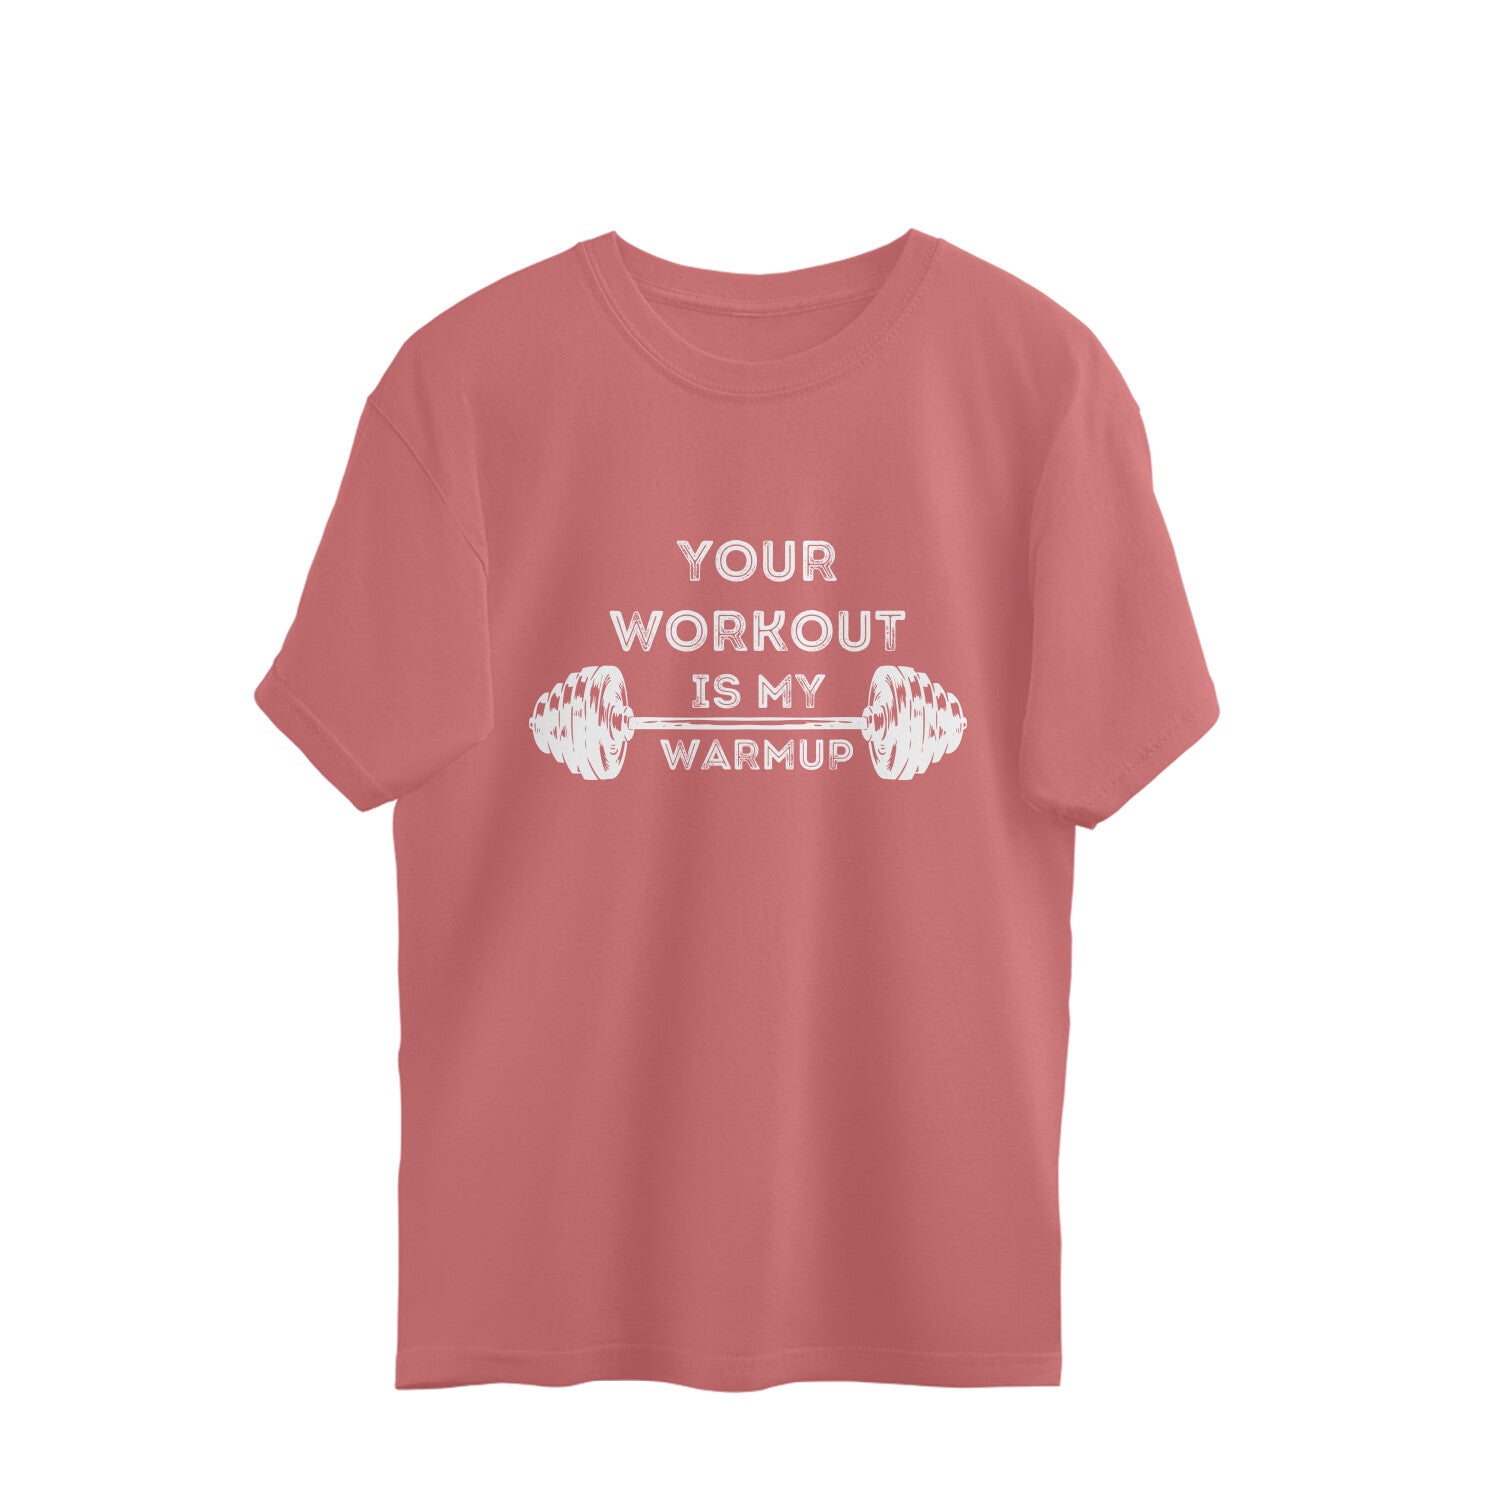 Your workout is my warmup oversized T-shirt